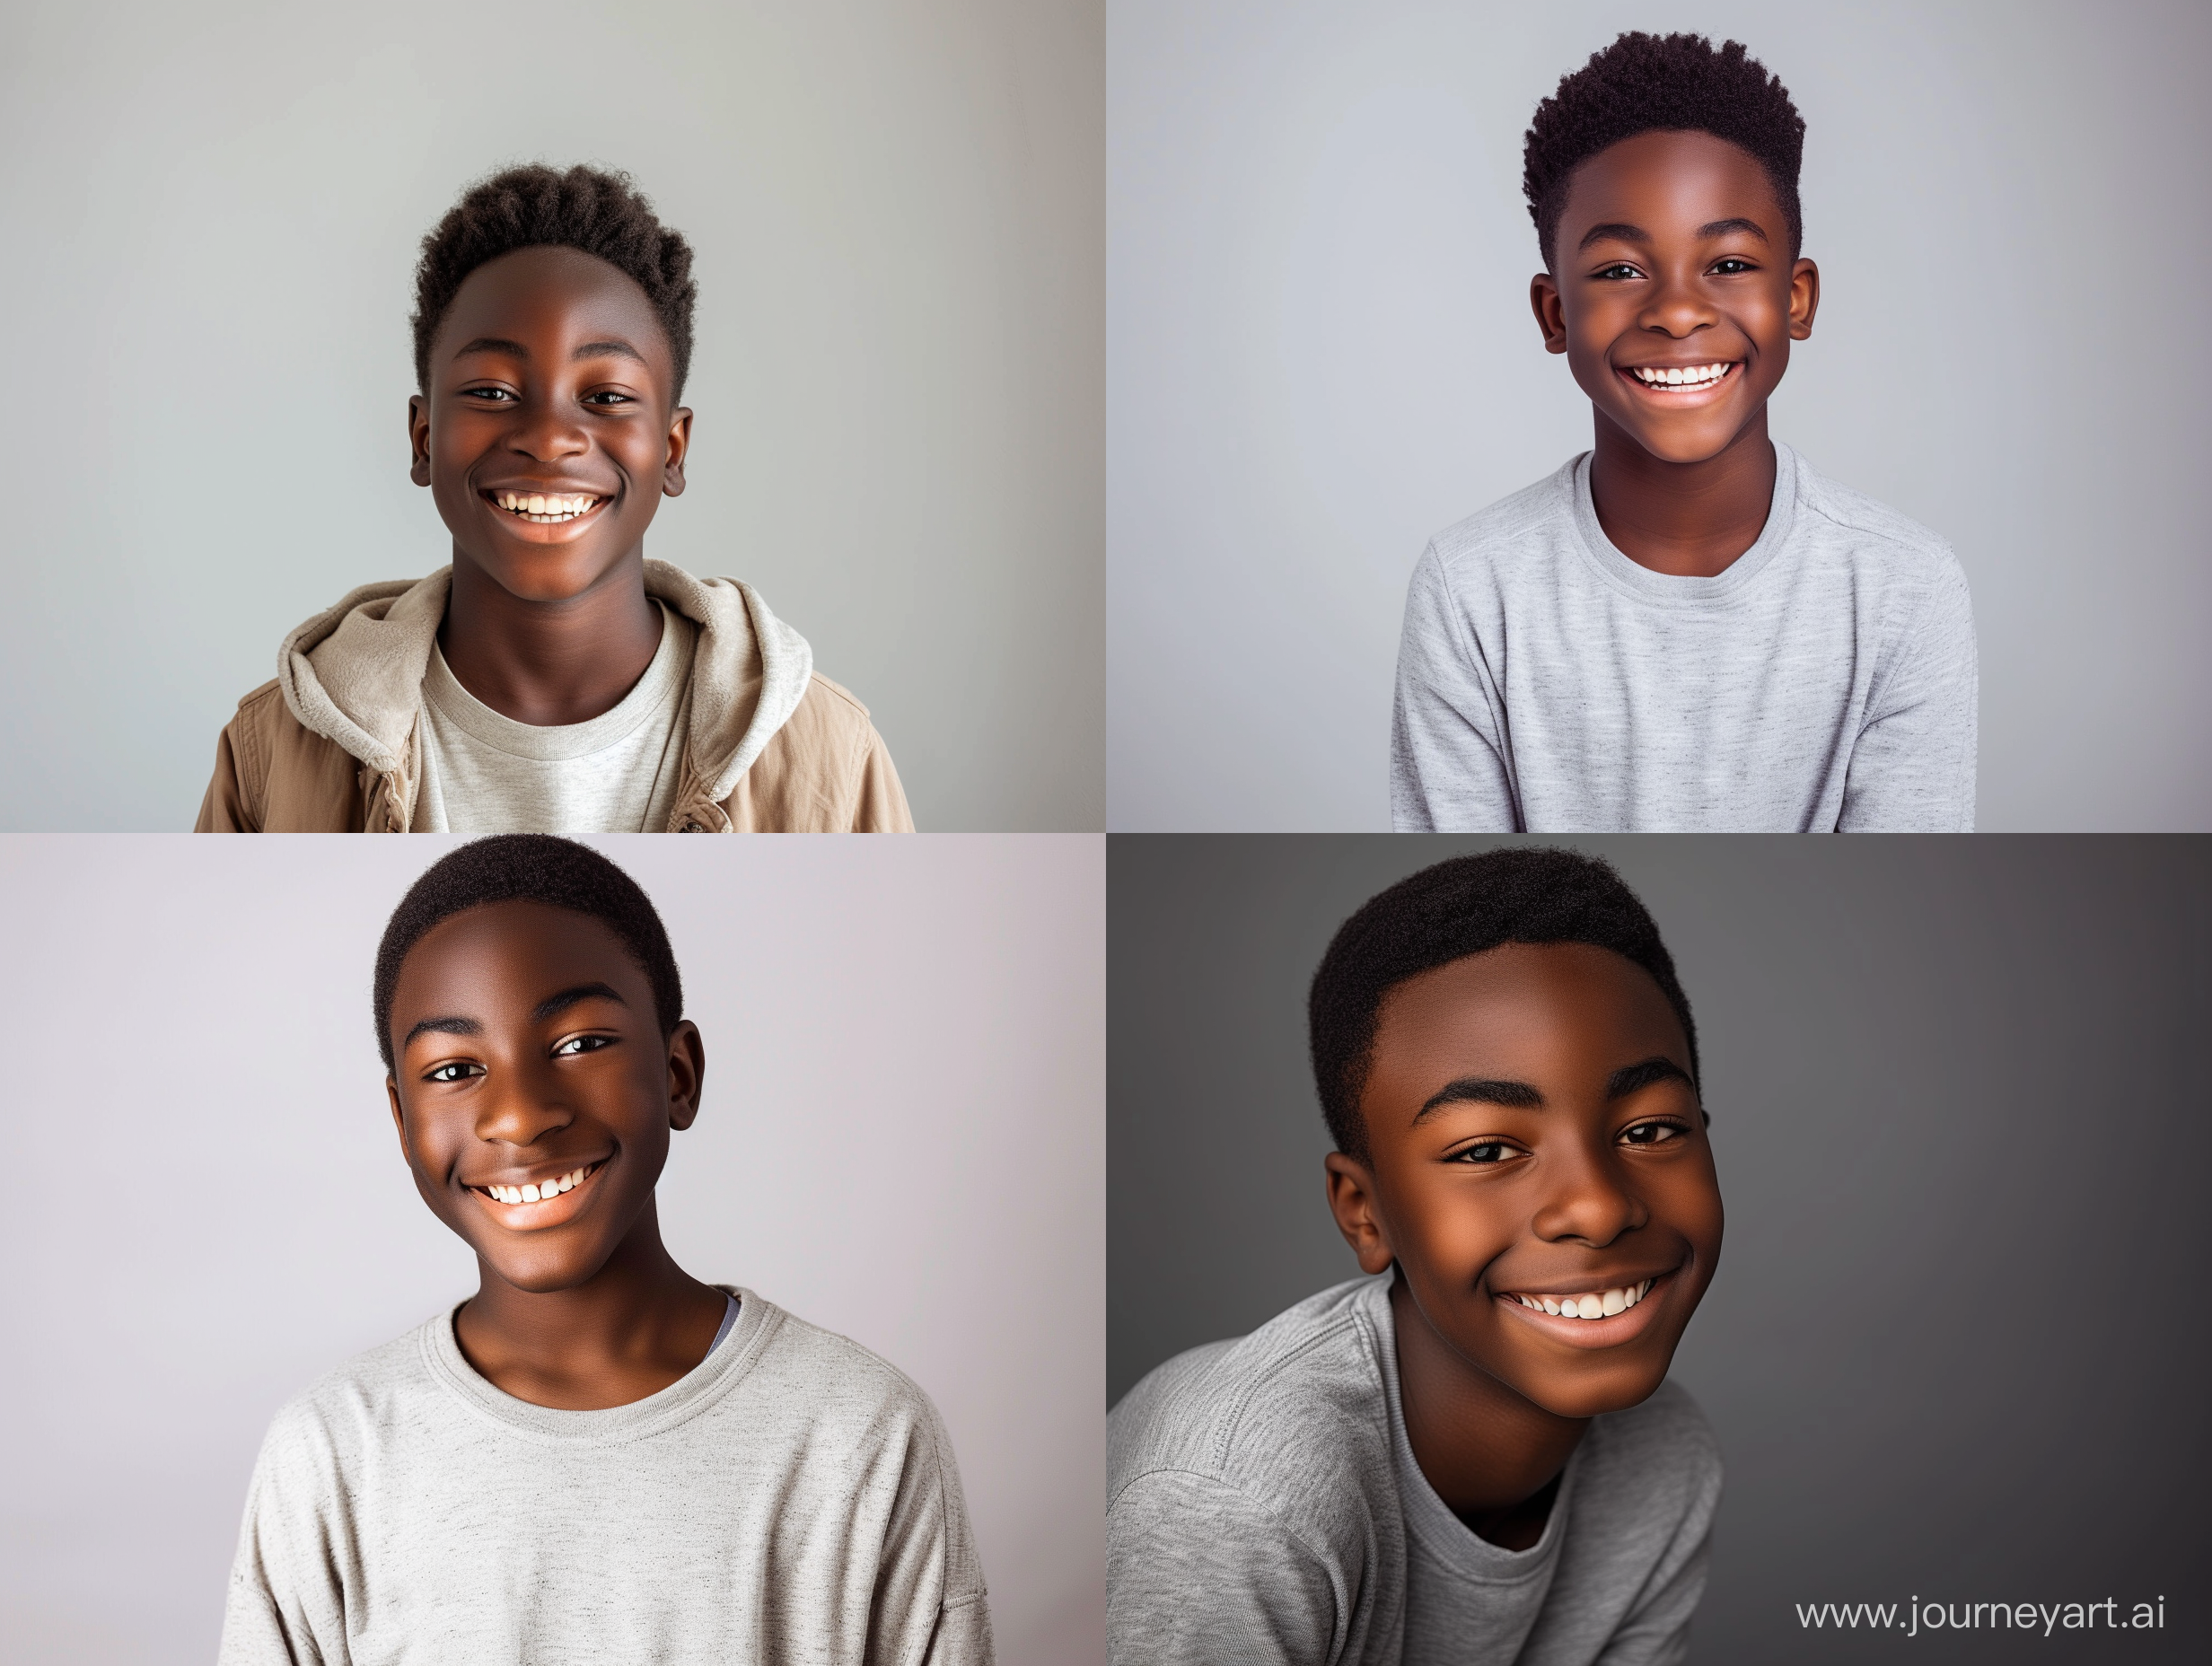 Generate a photorealistic, inspiring and relatable image of a smiling 13-year-old black dark skinned teenage boy from the waist up who exudes confidence and approachability. This will be the brand image for a mentorship organization that aims to empower teenagers. Use natural lighting, beautiful clothing styles, and authentic facial expressions to create a compelling image that resonates with the target audience. The image should look like it was taken by a canon 6d mk II 105mm lens